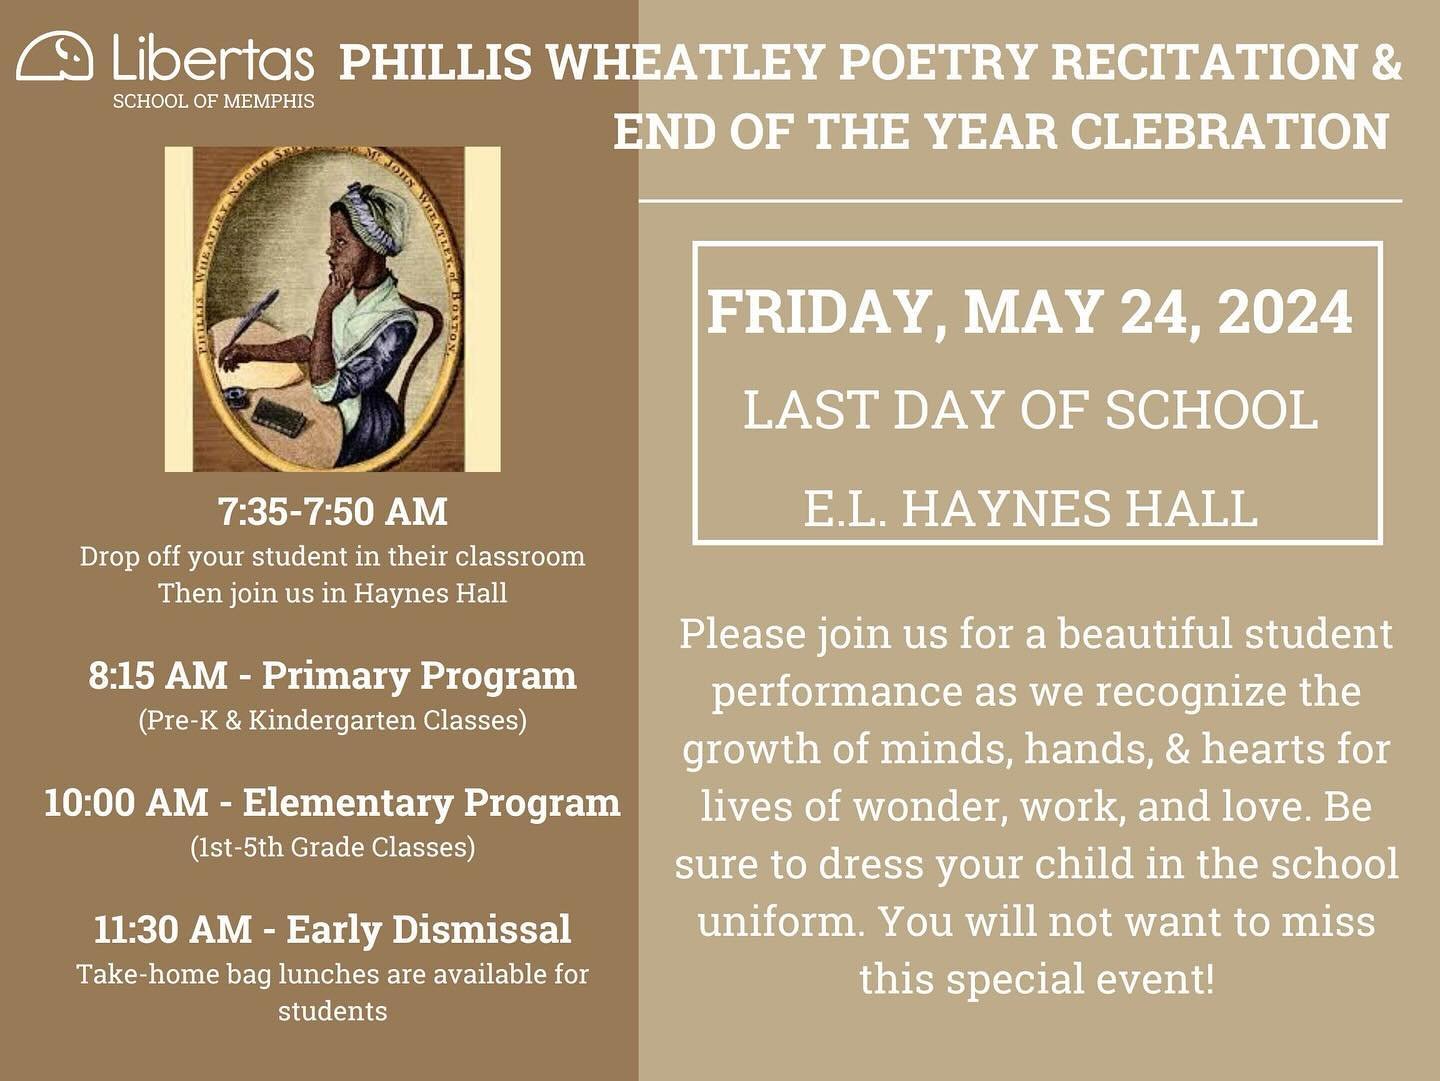 Please join us for our Phillis Wheatley Poetry Recitation and End-of-Year Program on Friday, May 24th. Primary students will start at 8:15 a.m., and elementary students will start at 10:00 a.m. Please see the flyer for more details